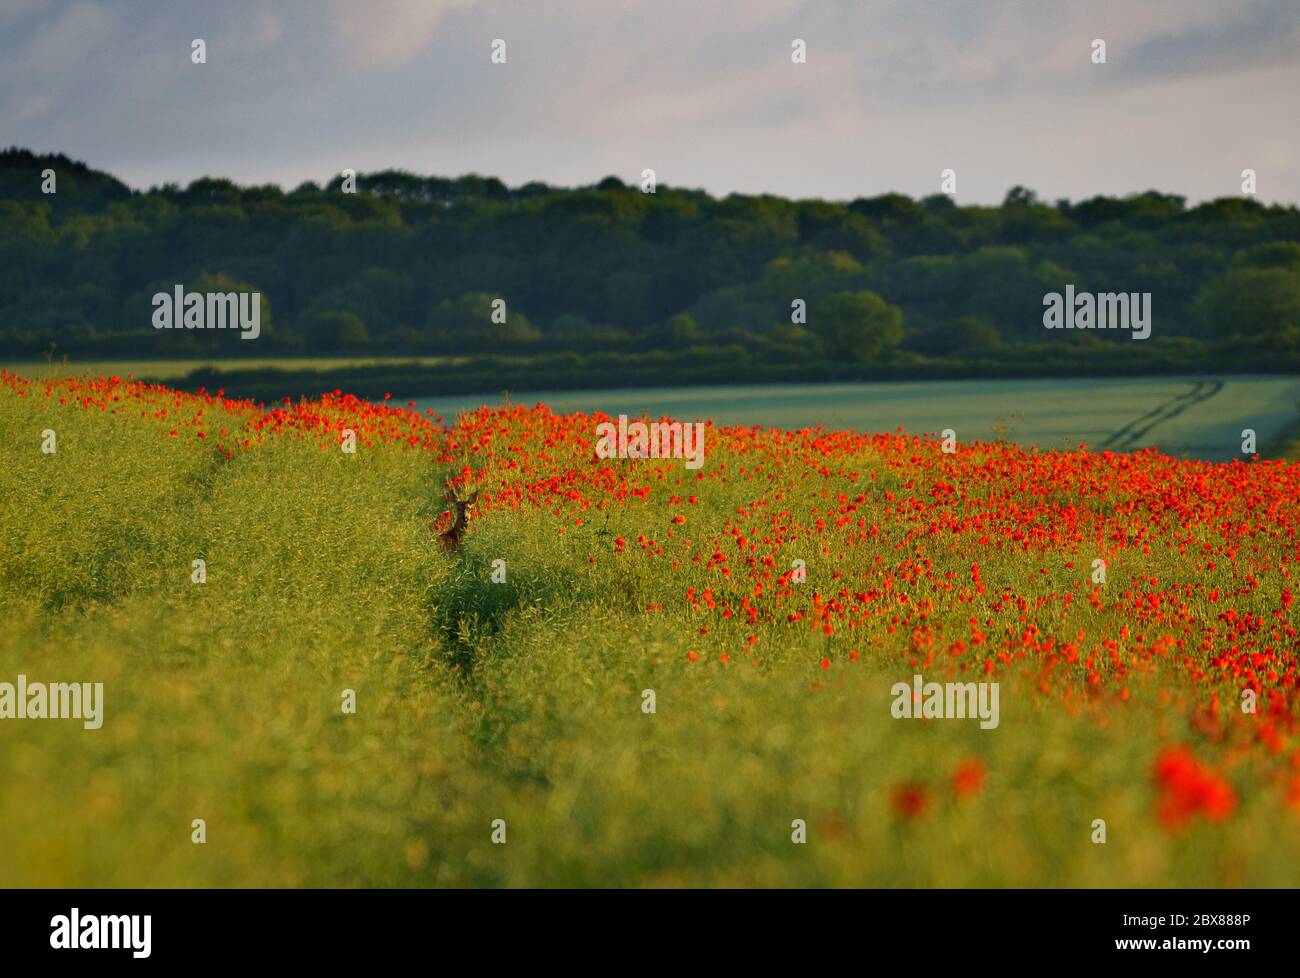 Dorchester, Dorset, UK. 6th June, 2020. UK Weather. A deer wanders through a poppy field as the sunrise shines golden light over the vibrant red poppies in West Dorset. Credit: DTNews/Alamy Live Stock Photo